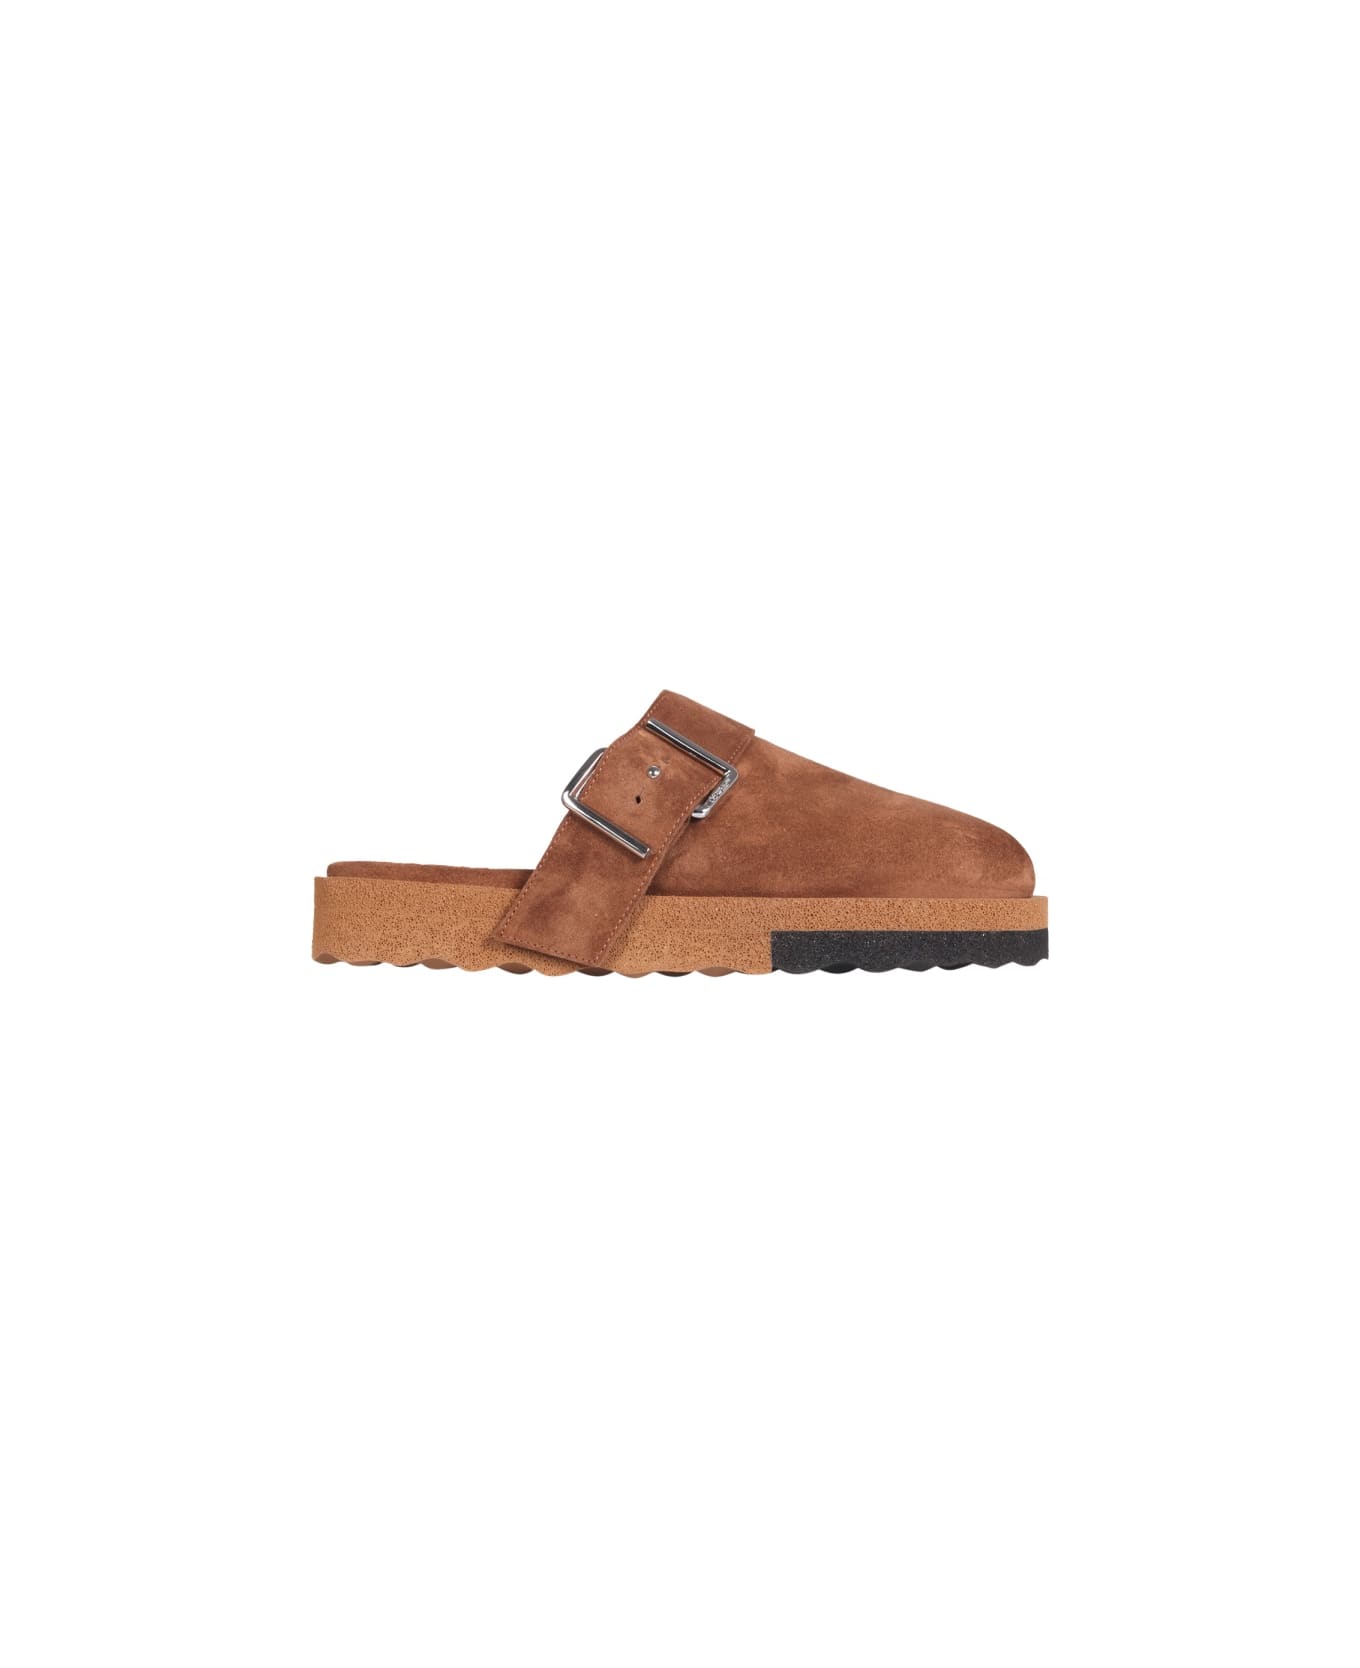 Off-White Comfort Slippers - BROWN